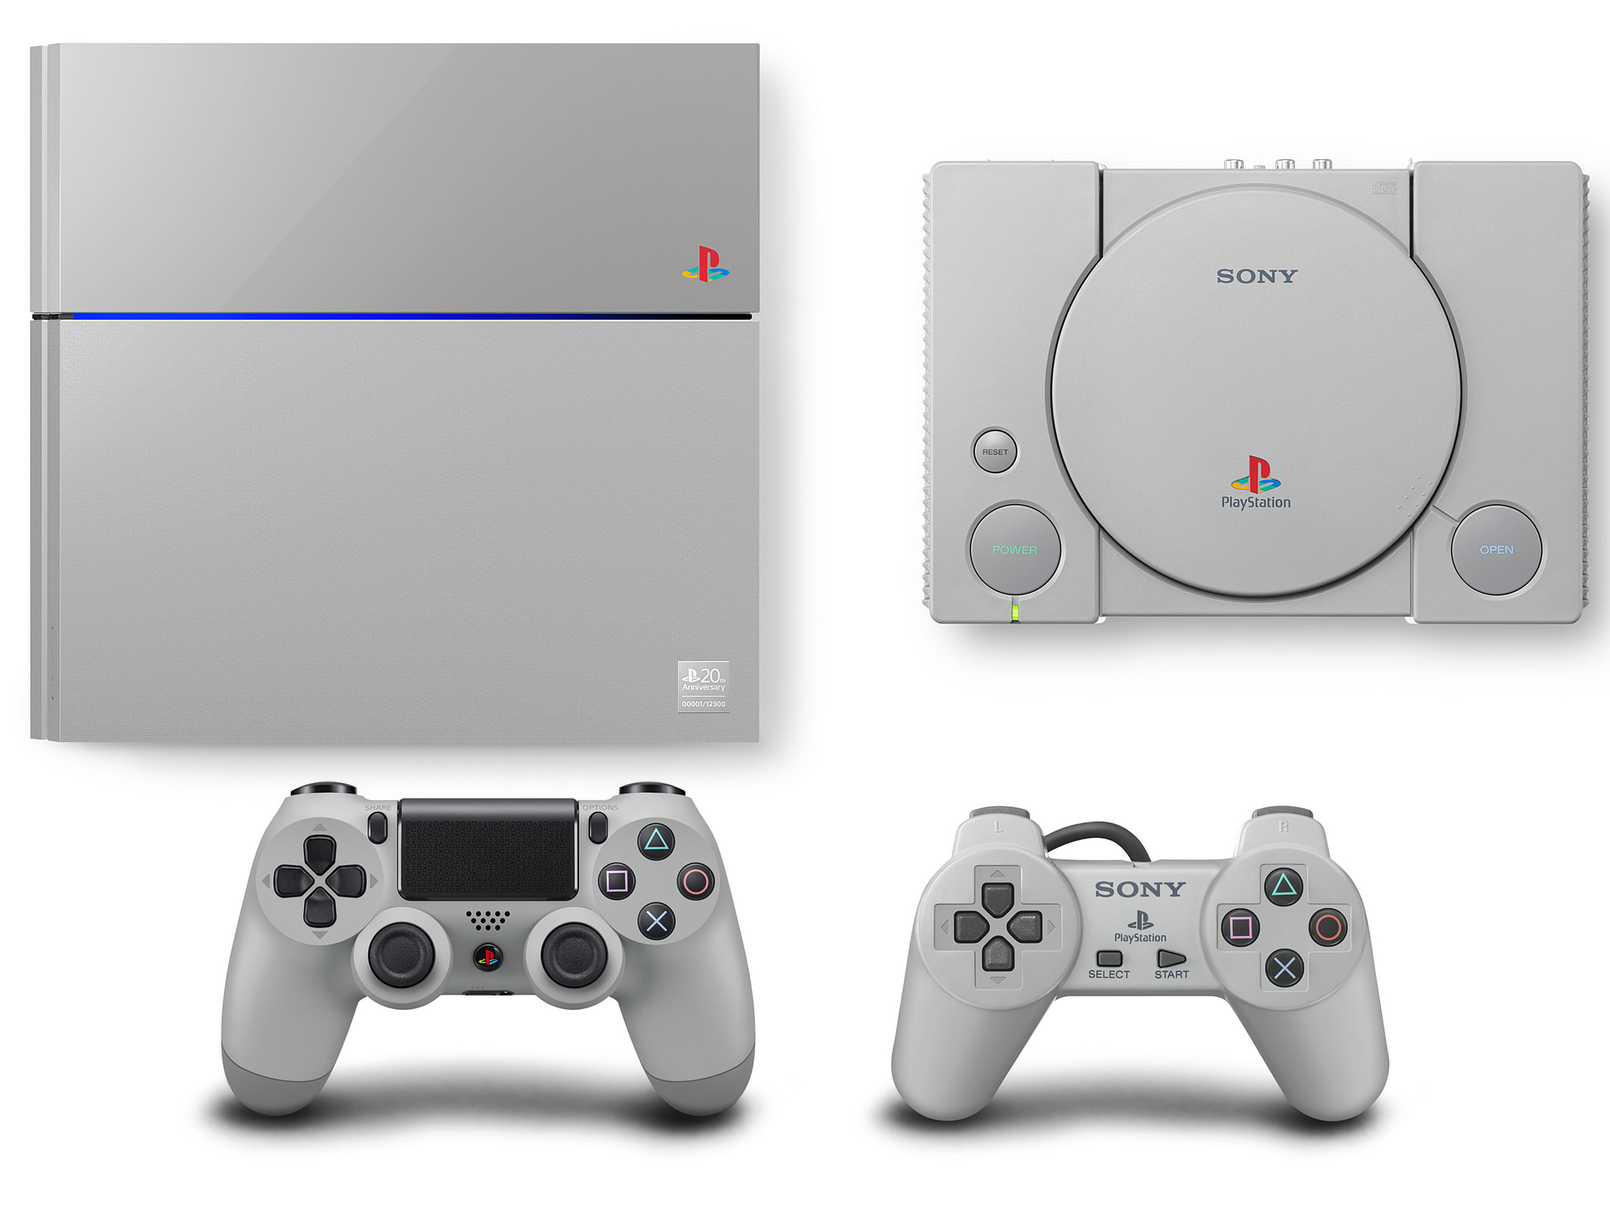 Ps4 live. Sony PLAYSTATION ps4. Приставка Sony ps1. Sony PLAYSTATION 4 Видеоигры. Sony PLAYSTATION 1-4.